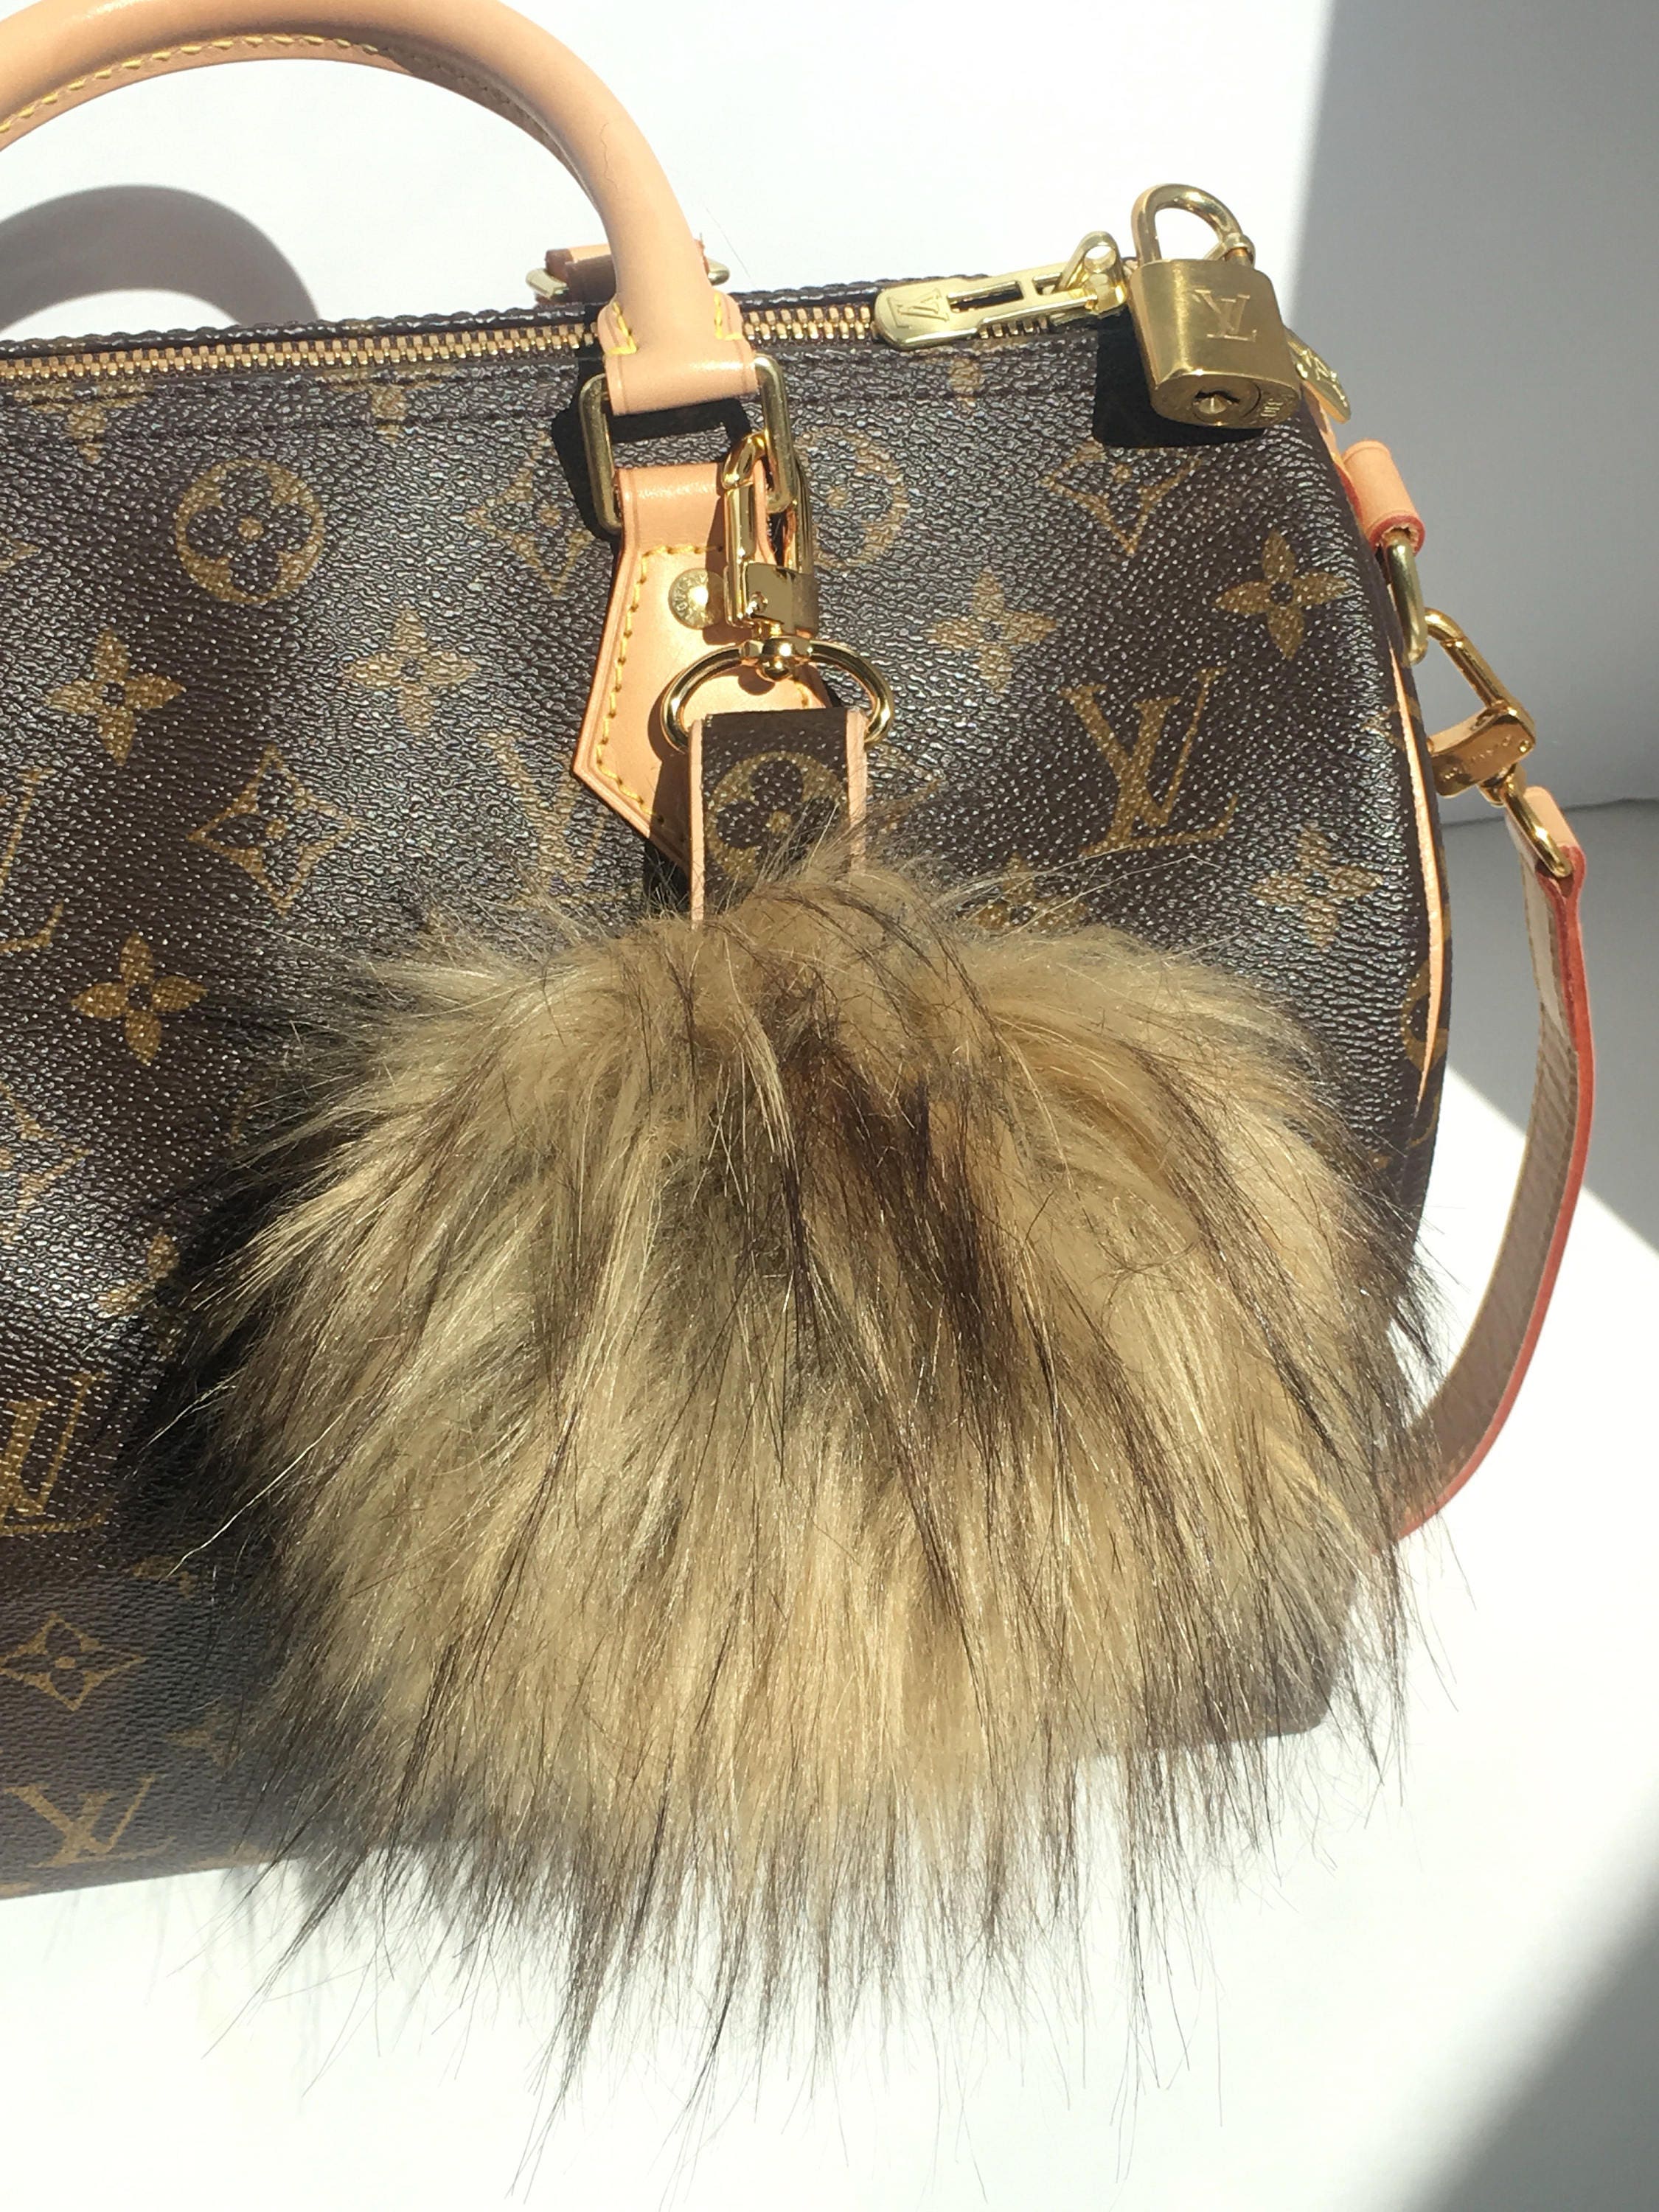 Louis Vuitton Bag Charm Pom Pom made with Authentic Upcycled